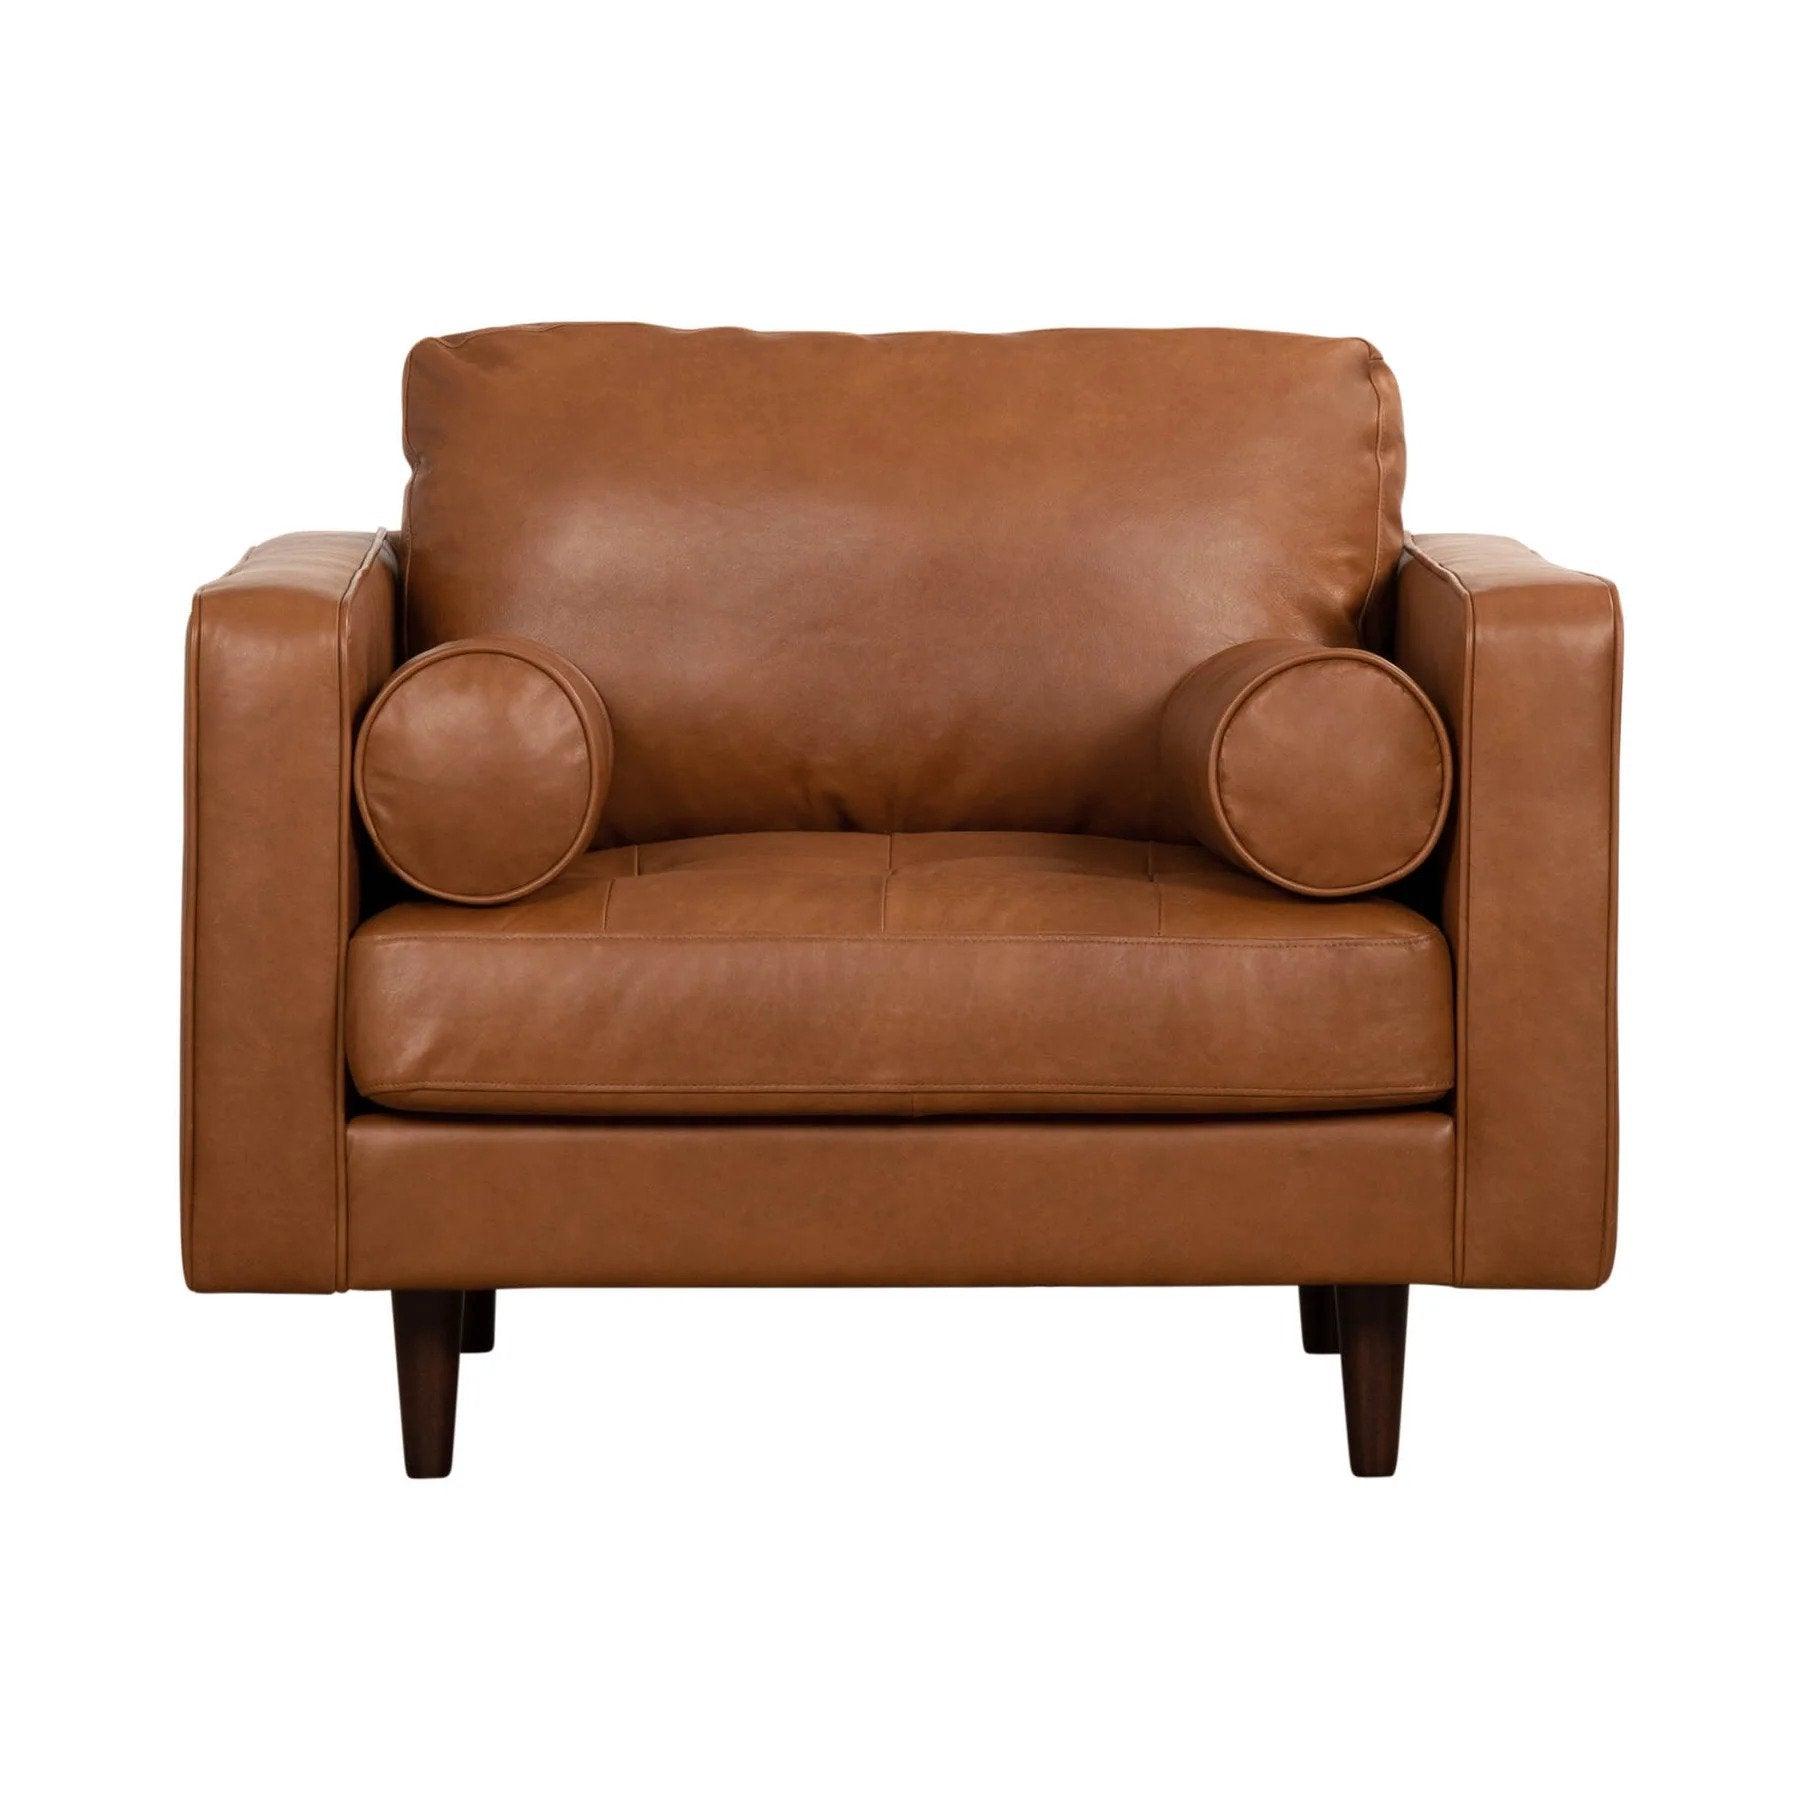 GEORGIA Genuine Leather Sectional Sofa - Oxford Spice - Northern Interiors